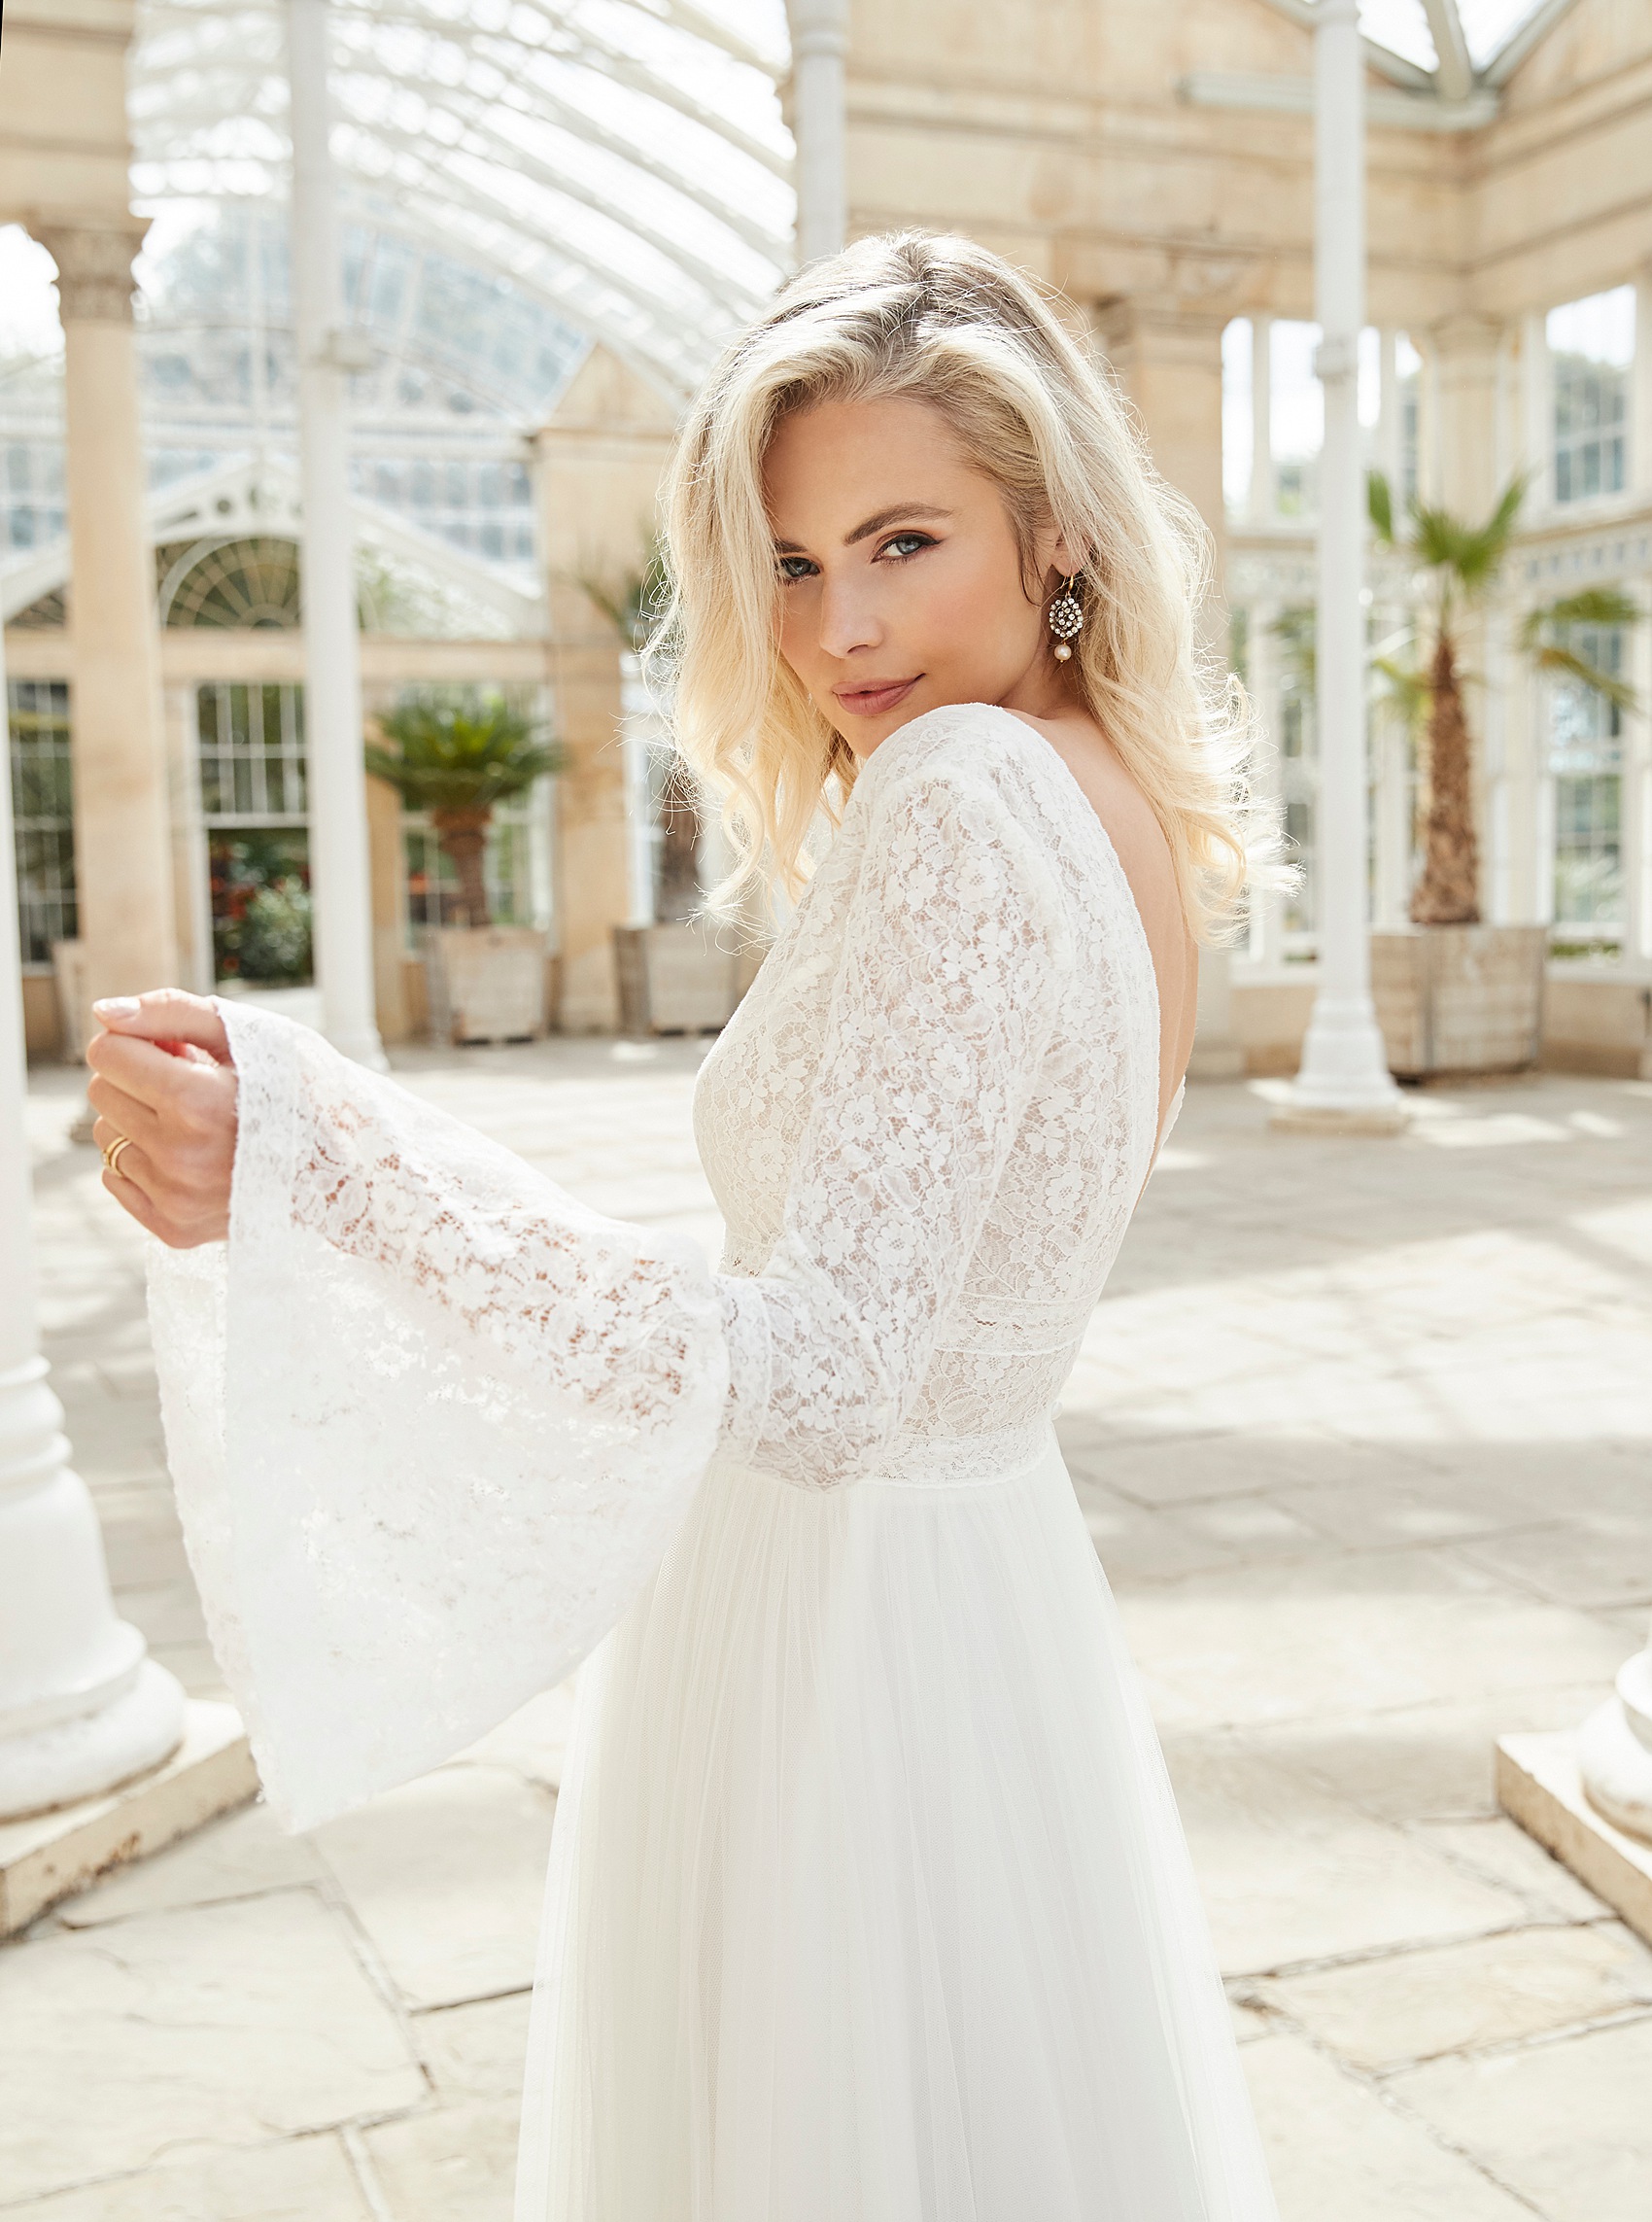 Introducing ‘Asteria’ by Sassi Holford - The Sublime New 2021 Bridal ...